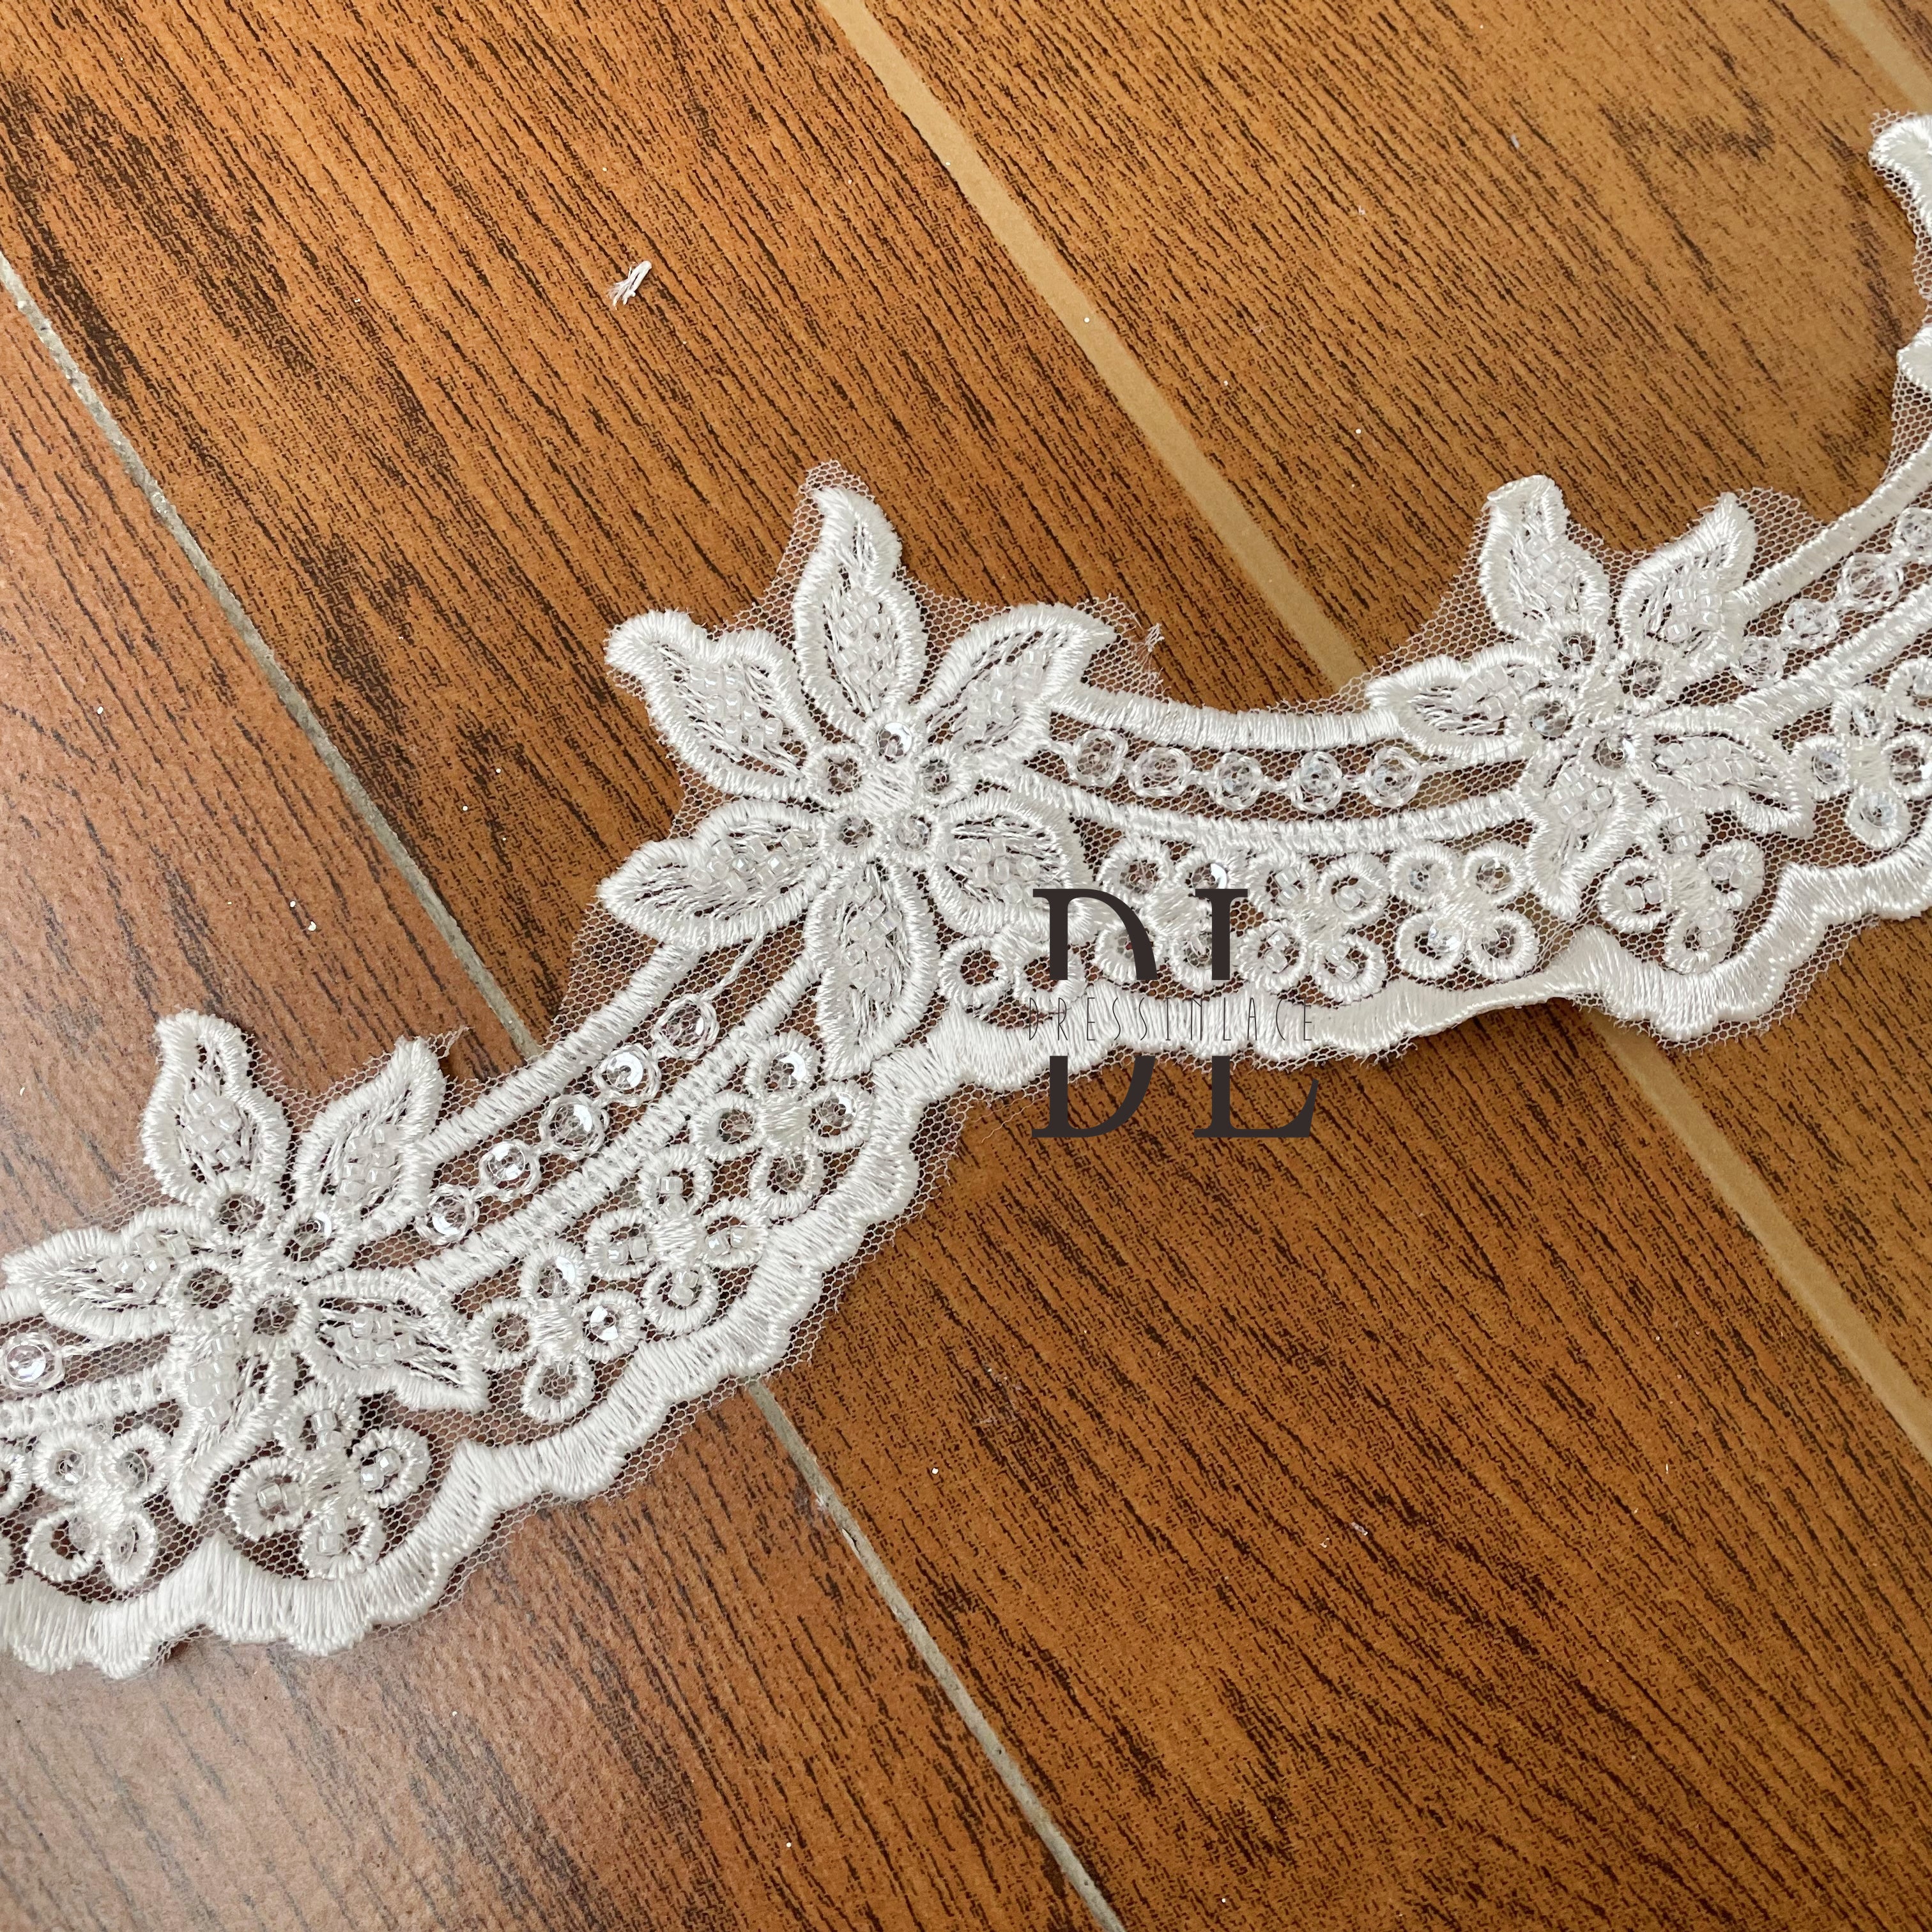 DLX09248 Embroidered Lace Trims Floras Border 9CM With Beads and Sequins for Garment Bride Veils